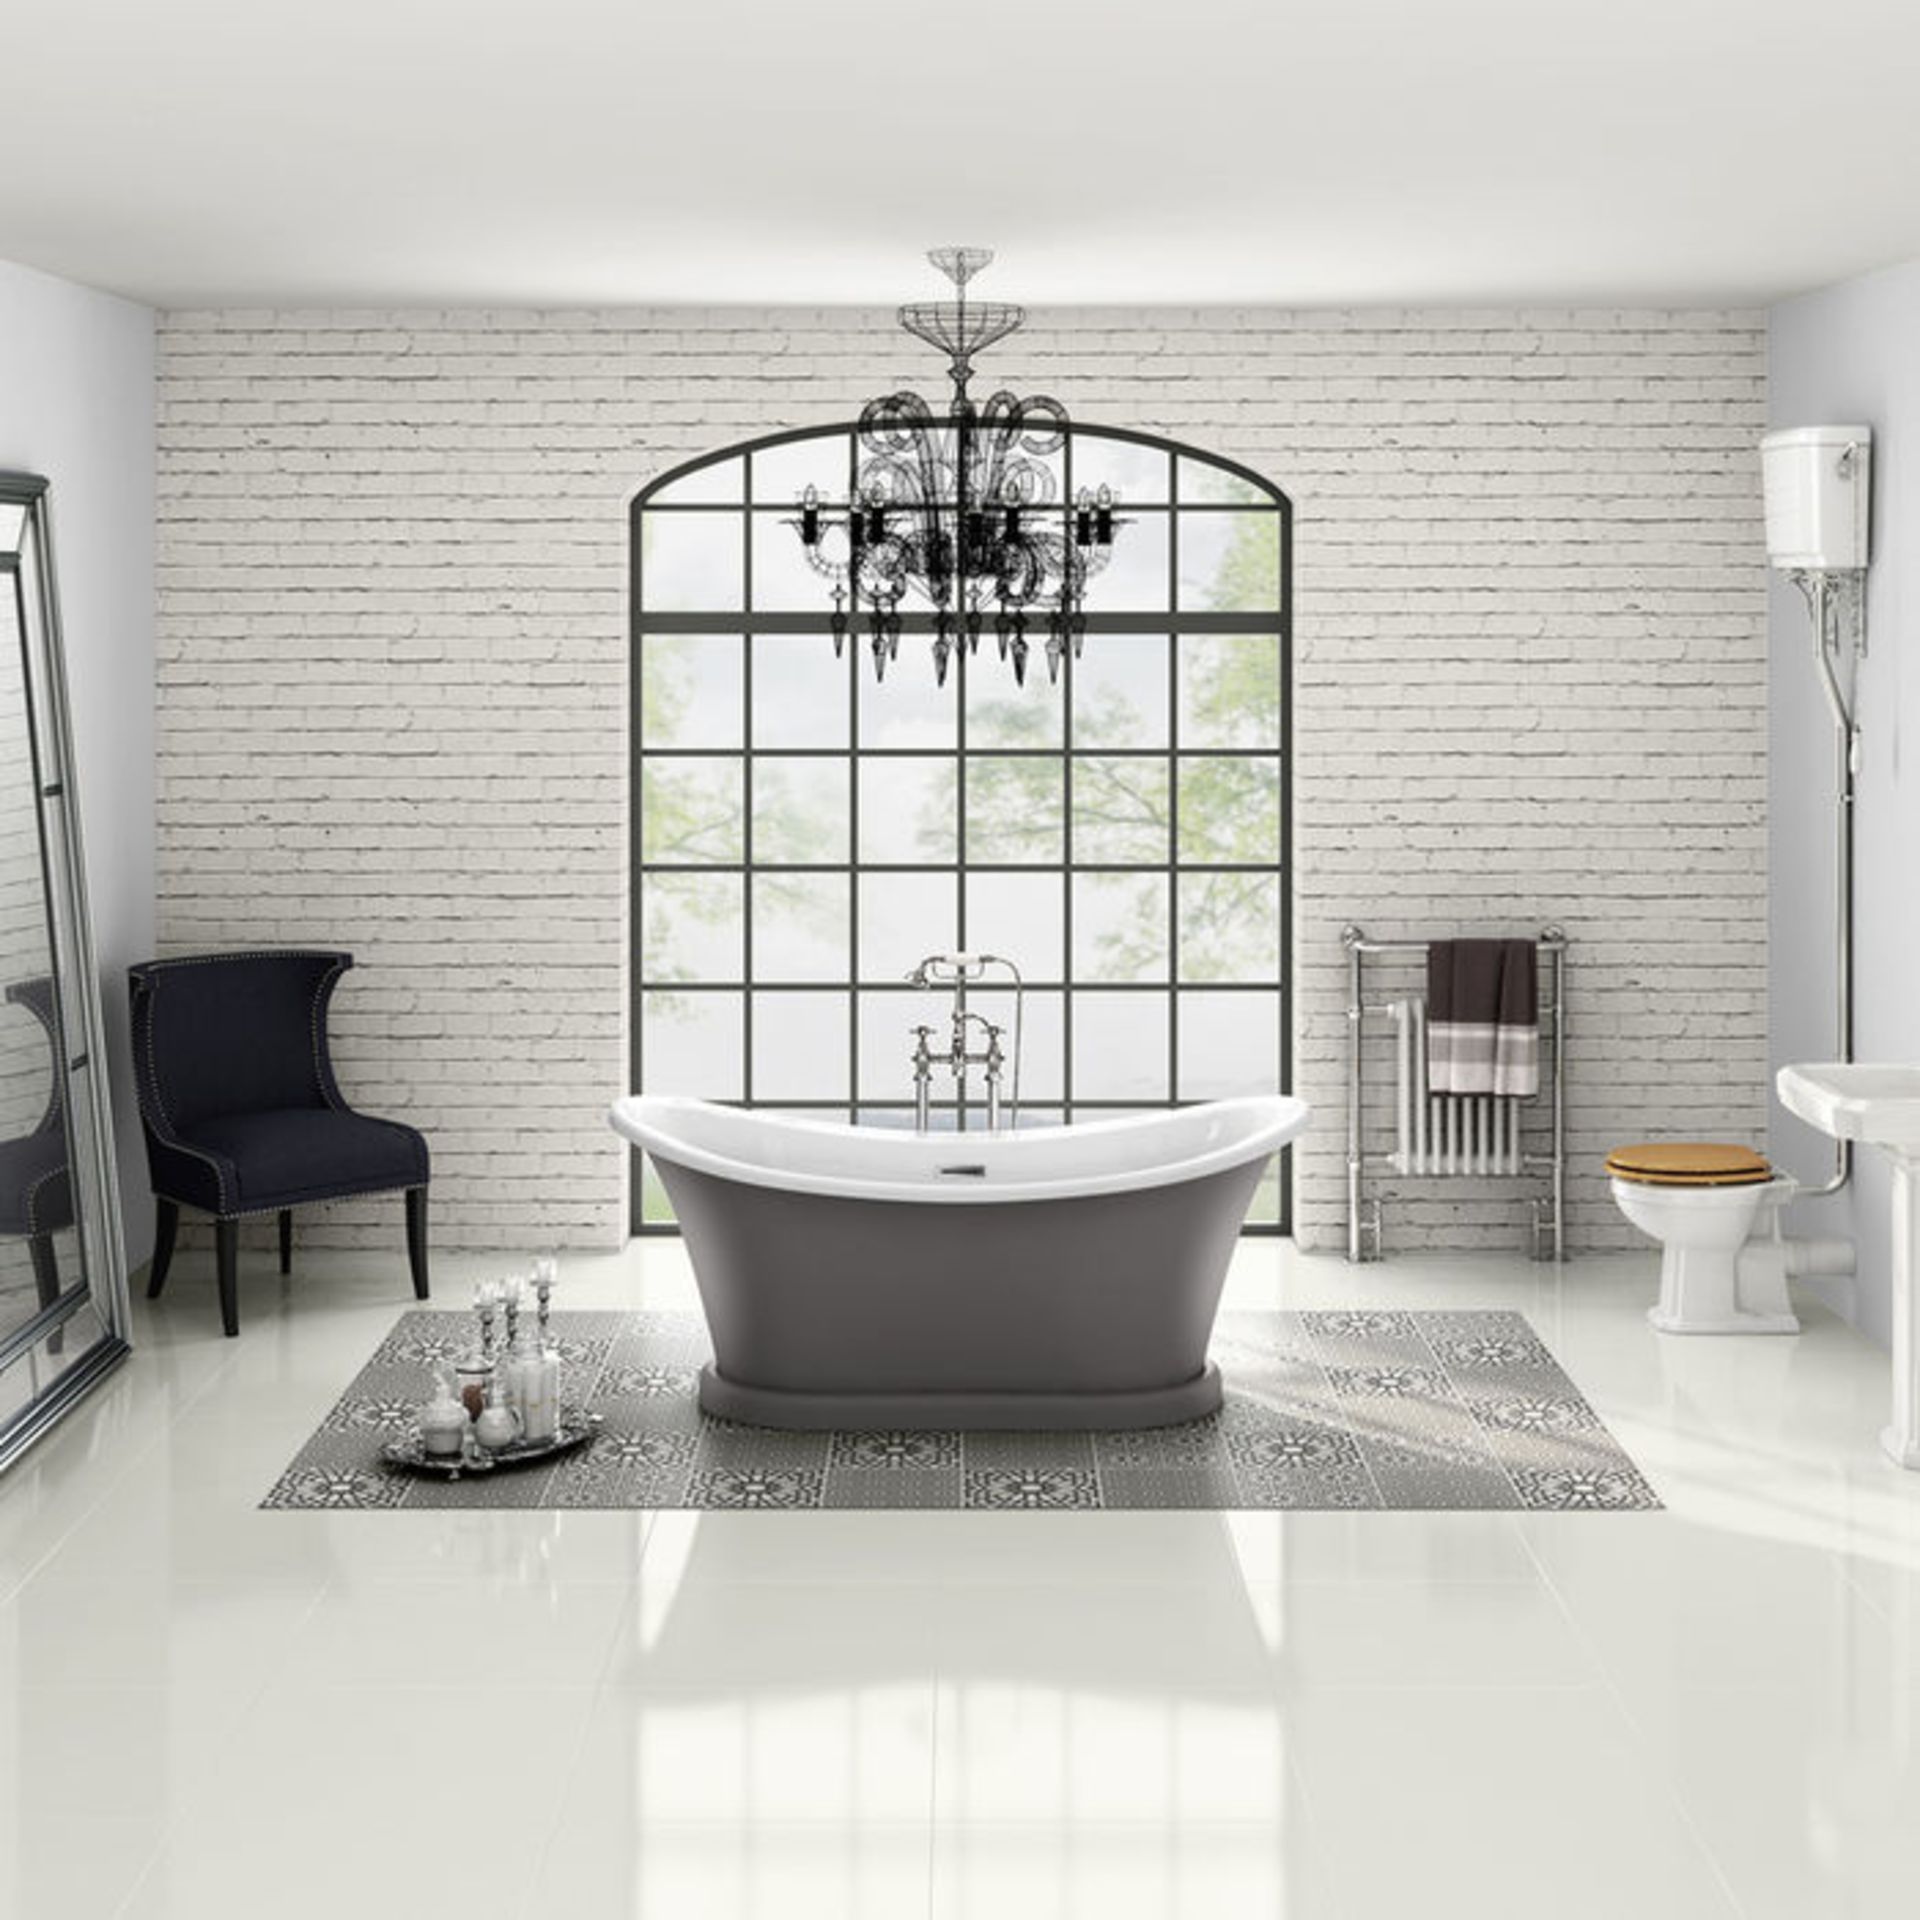 (XS3) 1700mm York Grey Bathtub. Victorian inspired bath Stunning Matte Earl Grey finish Double ended - Image 3 of 6